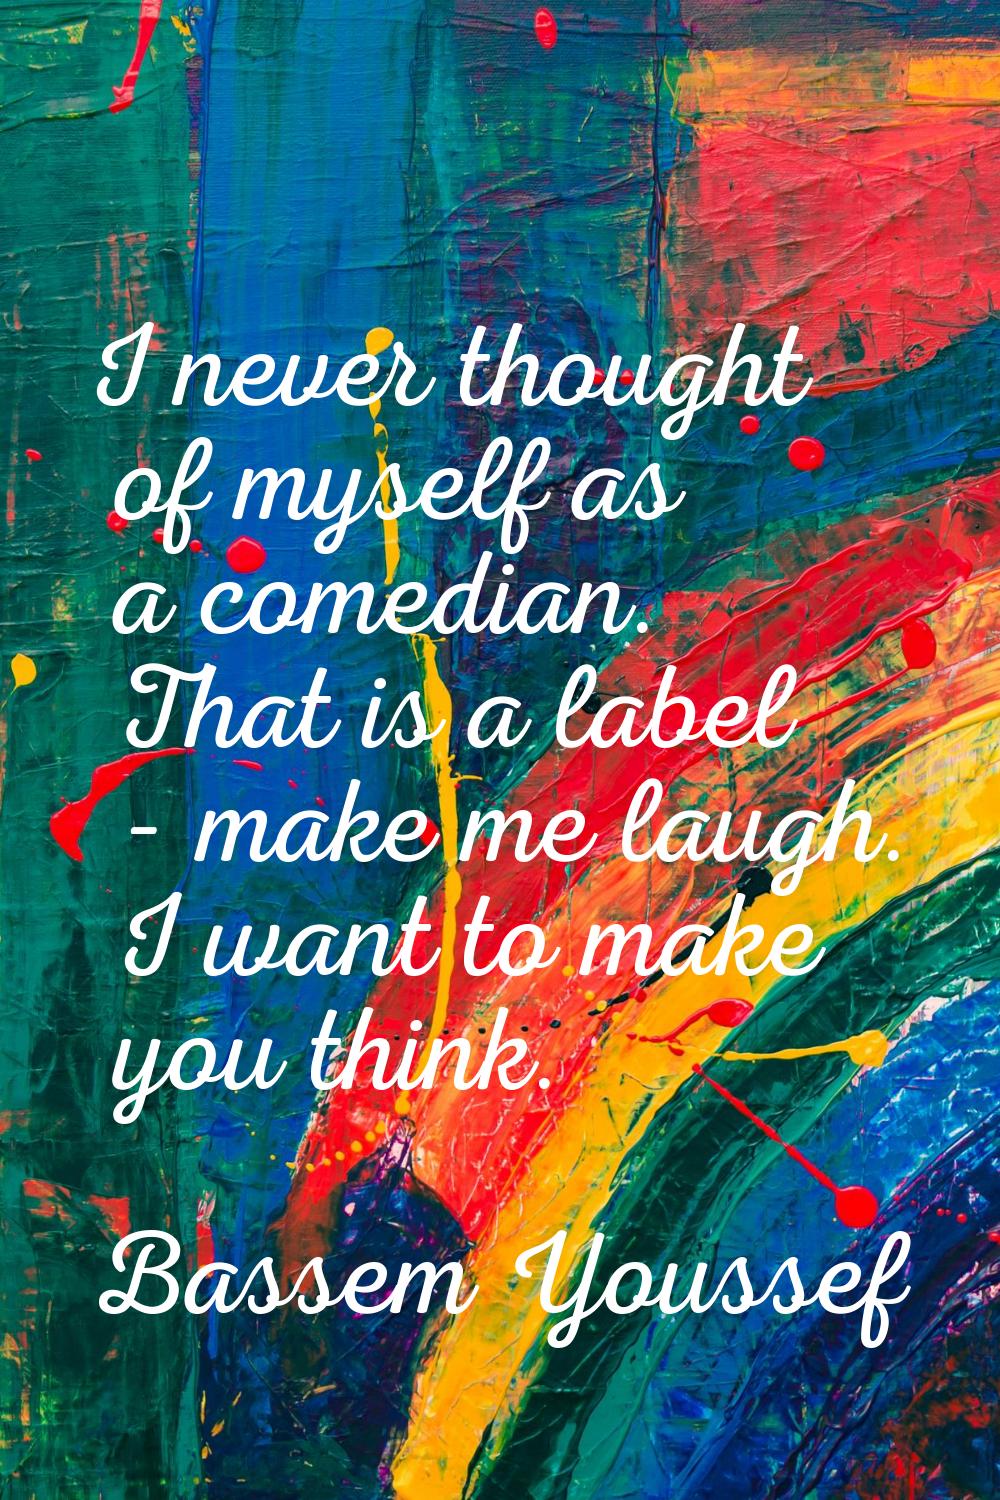 I never thought of myself as a comedian. That is a label - make me laugh. I want to make you think.